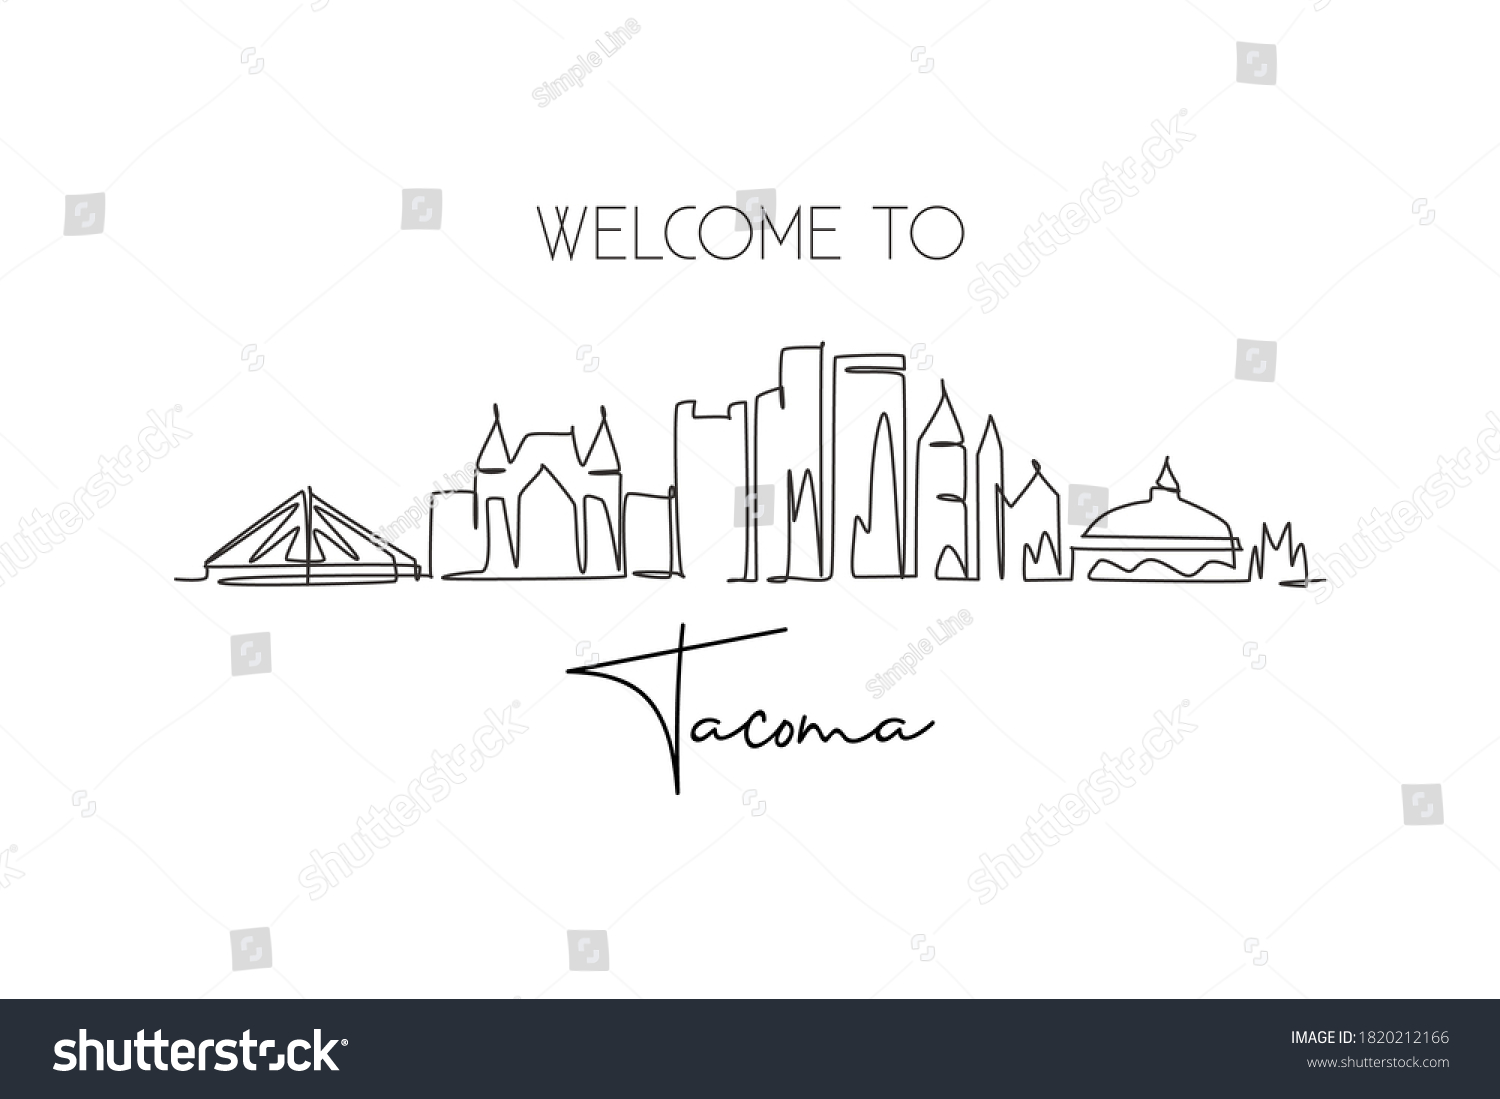 SVG of Single continuous line drawing of Tacoma city skyline, Washington. Famous city scraper landscape. World travel home wall decor art poster print concept. Modern one line draw design vector illustration svg